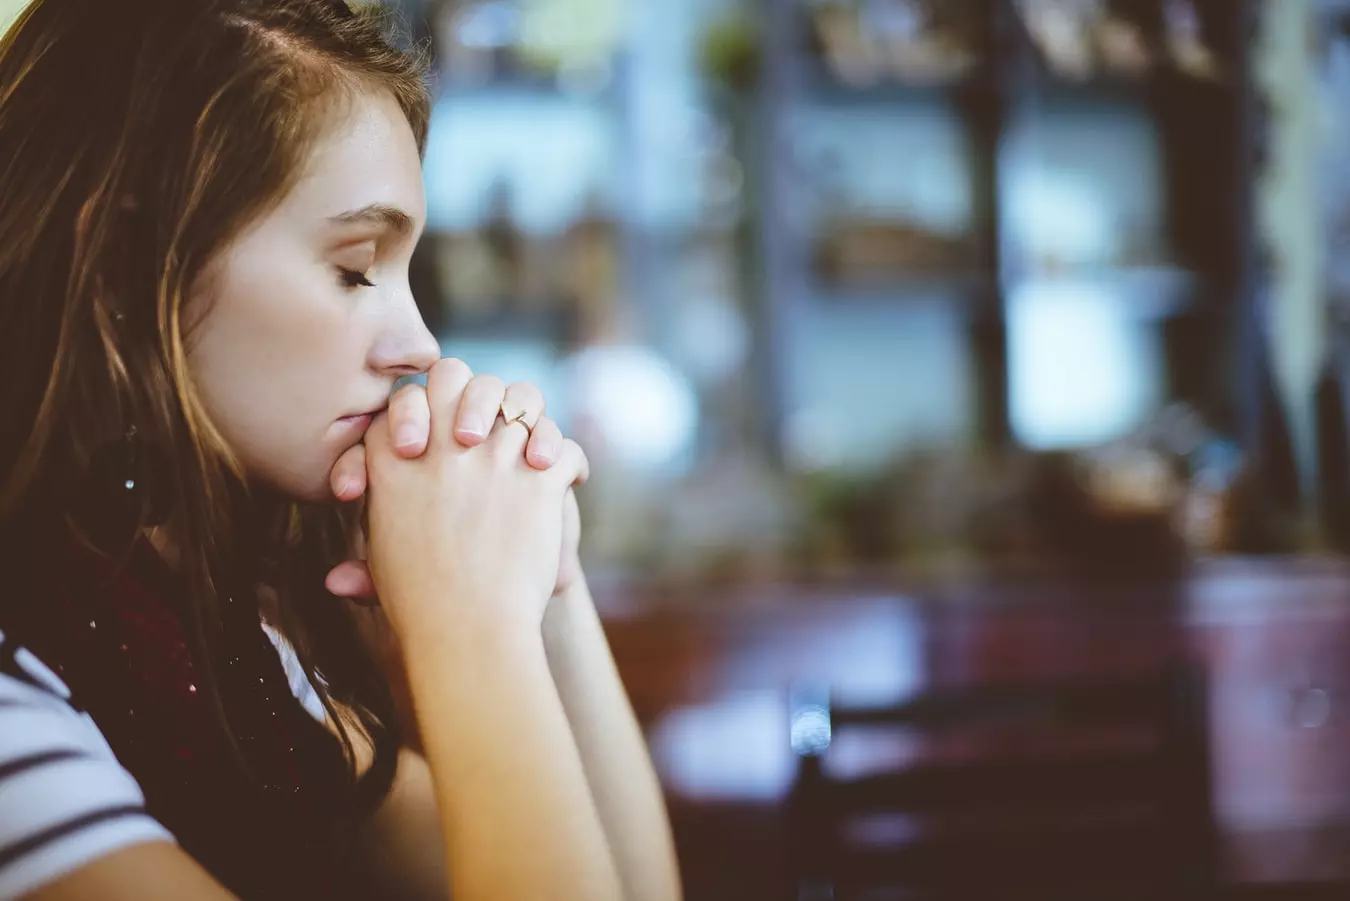 A woman praying and hoping for a healthy recovery from addiction